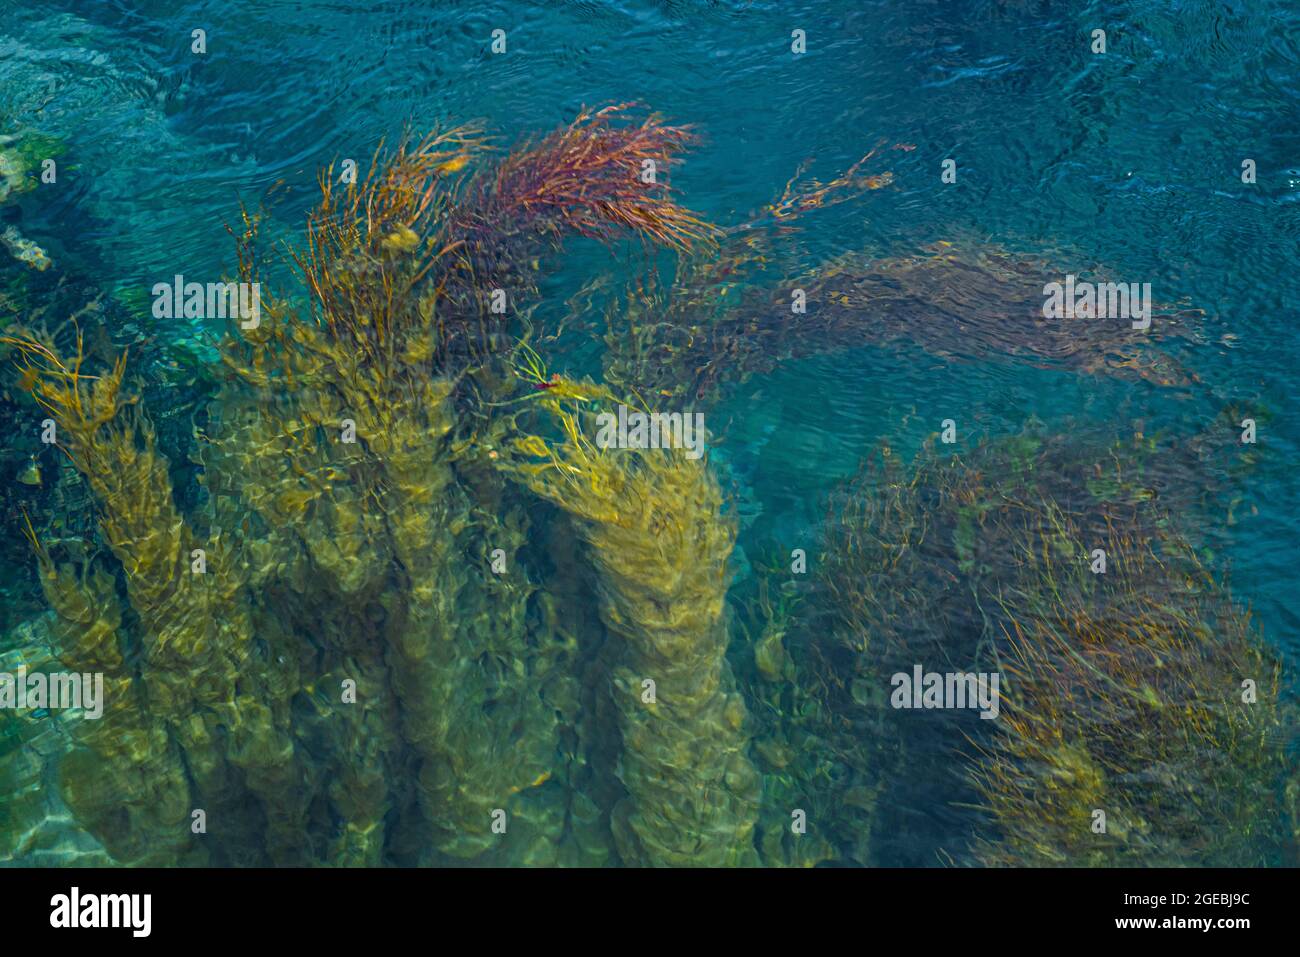 Water with algae that create beautiful abstract images colored green and blue in various shades. Abstract background Stock Photo